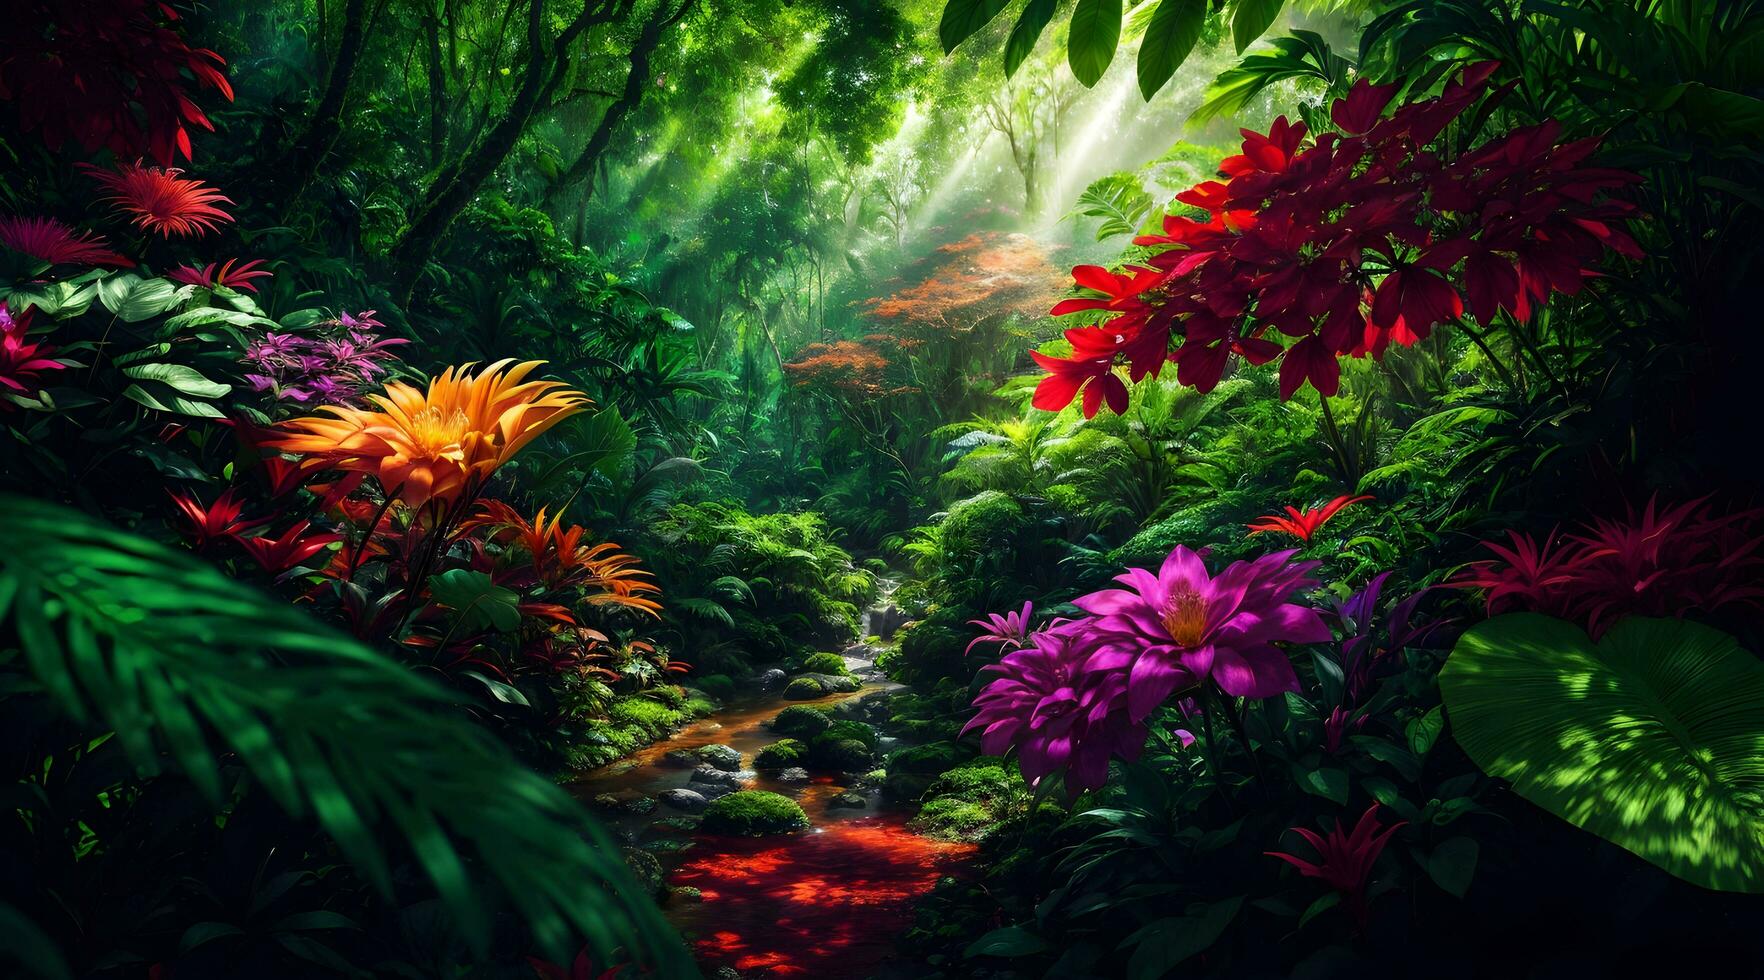 A breathtaking 4K wallpaper featuring a dense tropical rainforest with towering trees adorned with lush green foliage